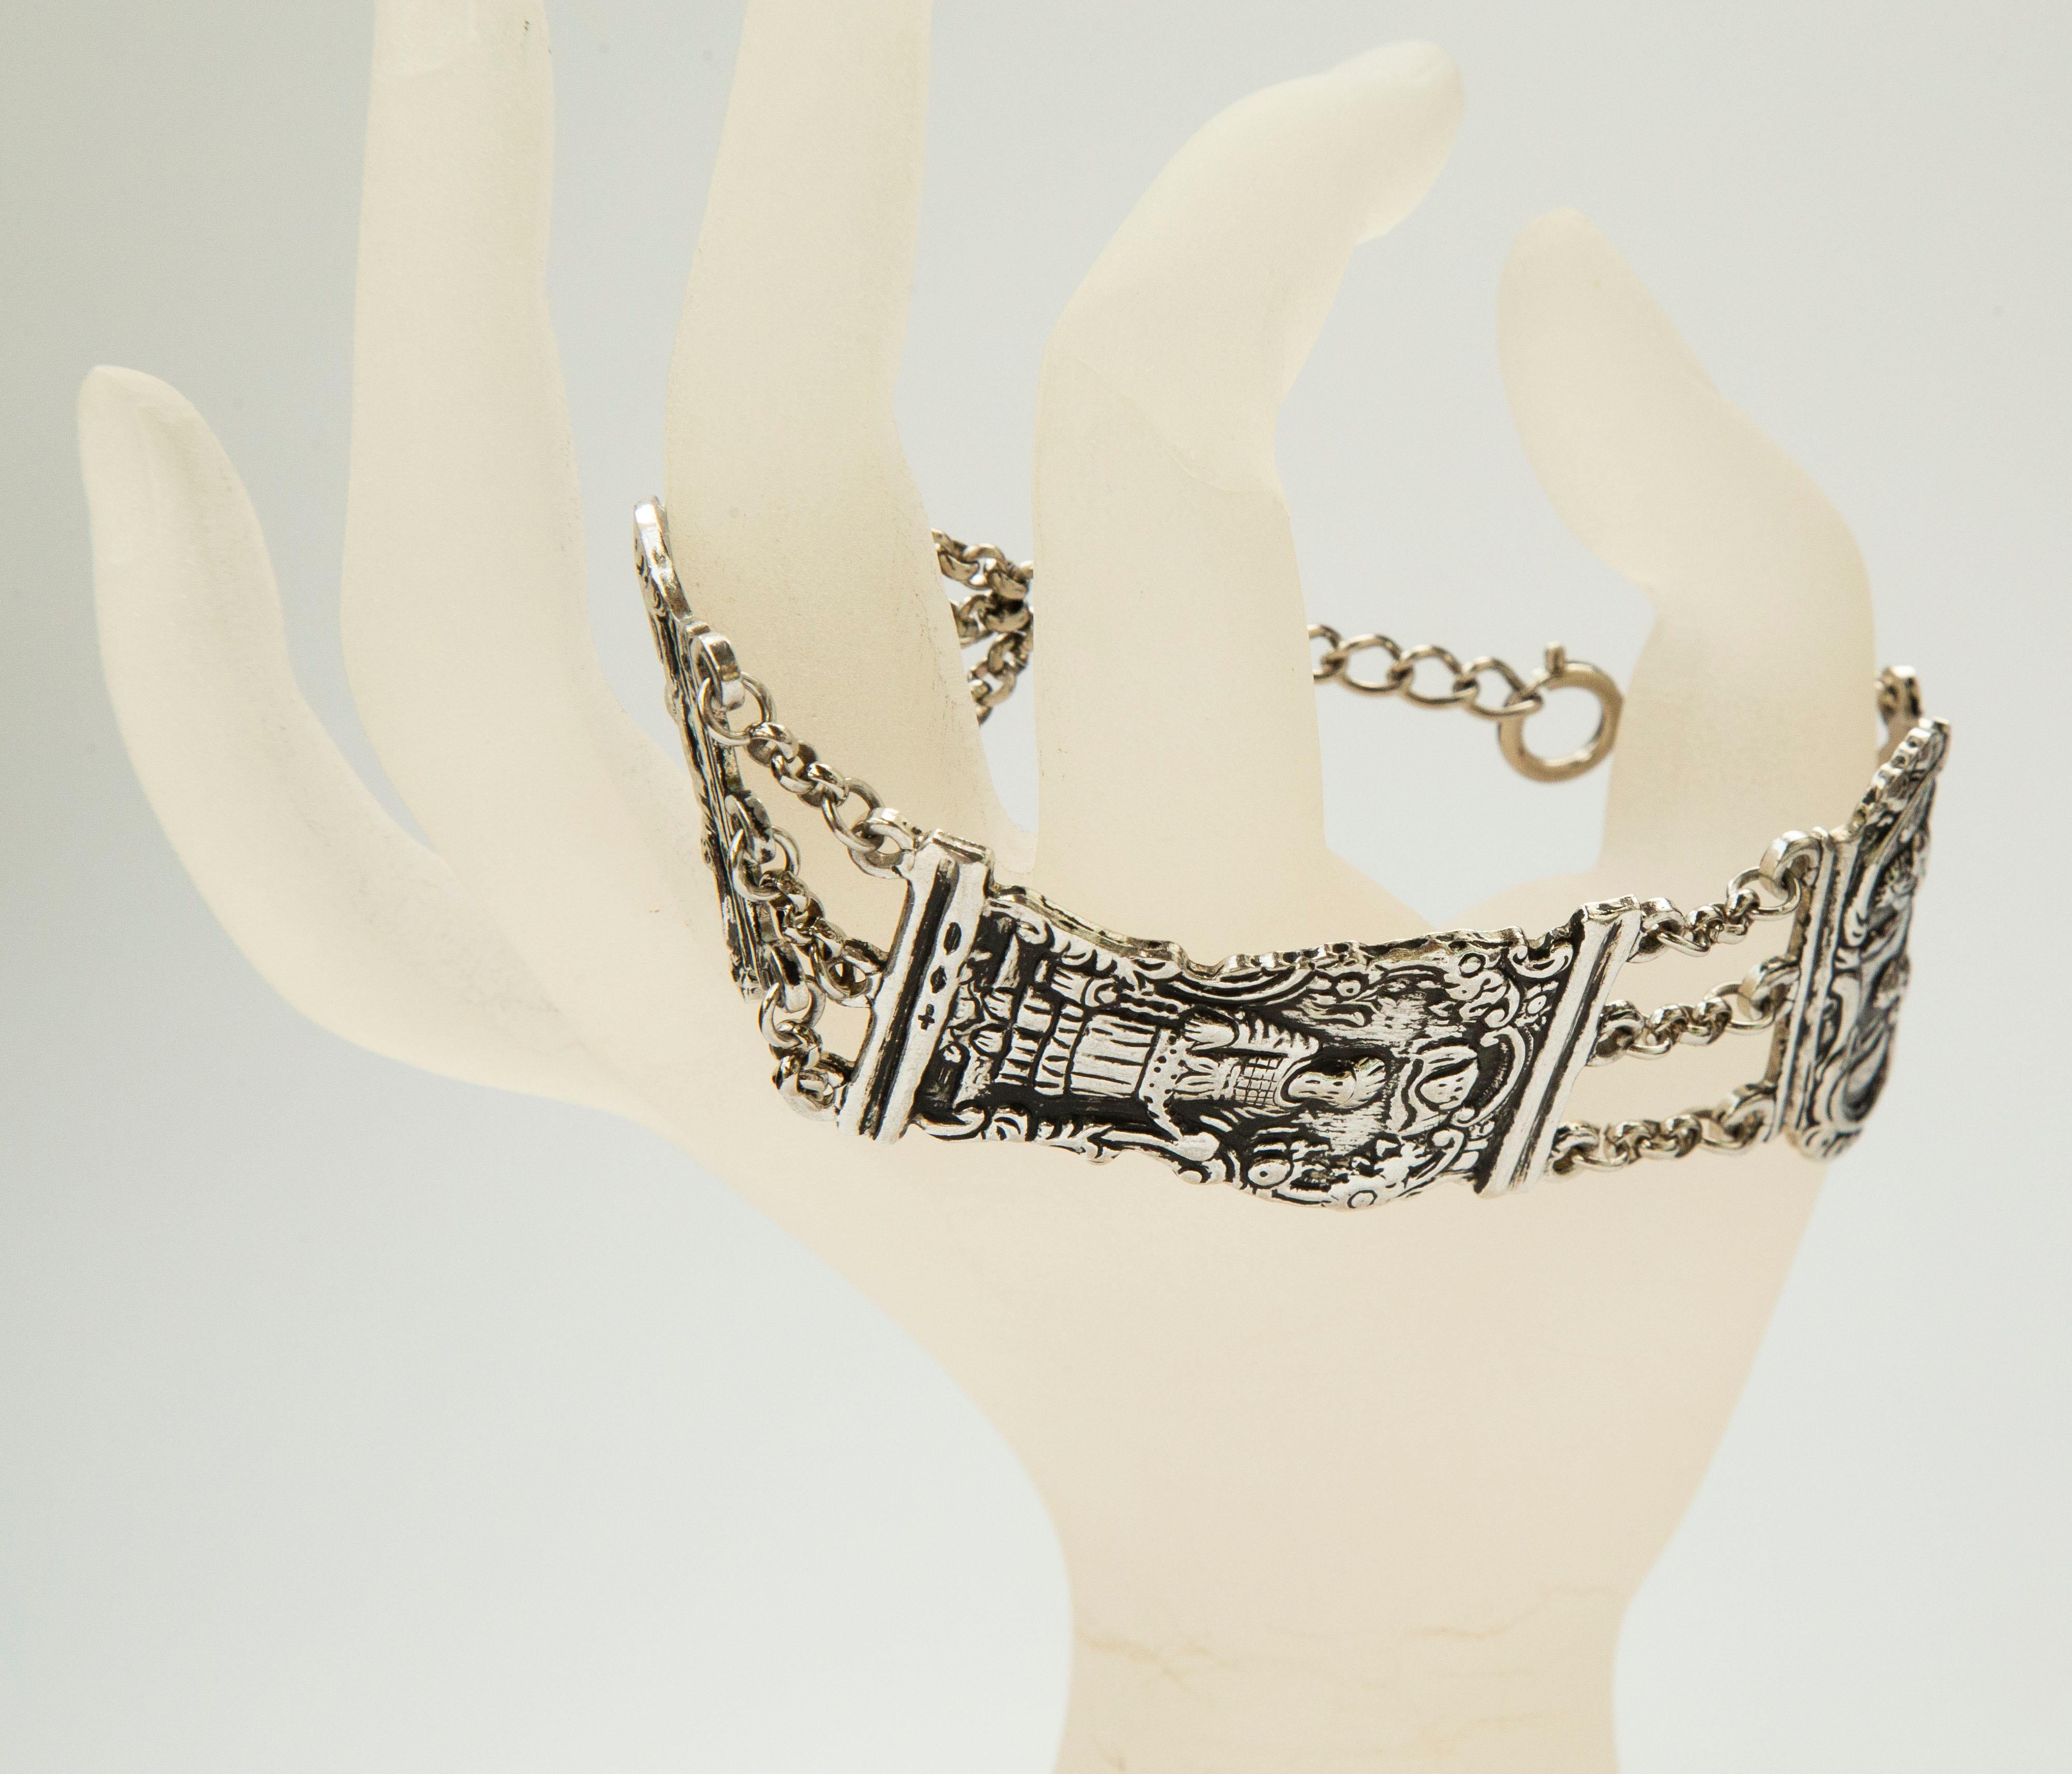 A silver bracelet made of antique bible closure created in1700s/1800s. The free links of the bracelet depict different biblical figures on a floral background and are connected with each other by means of three row chain. The bracelet is not marked